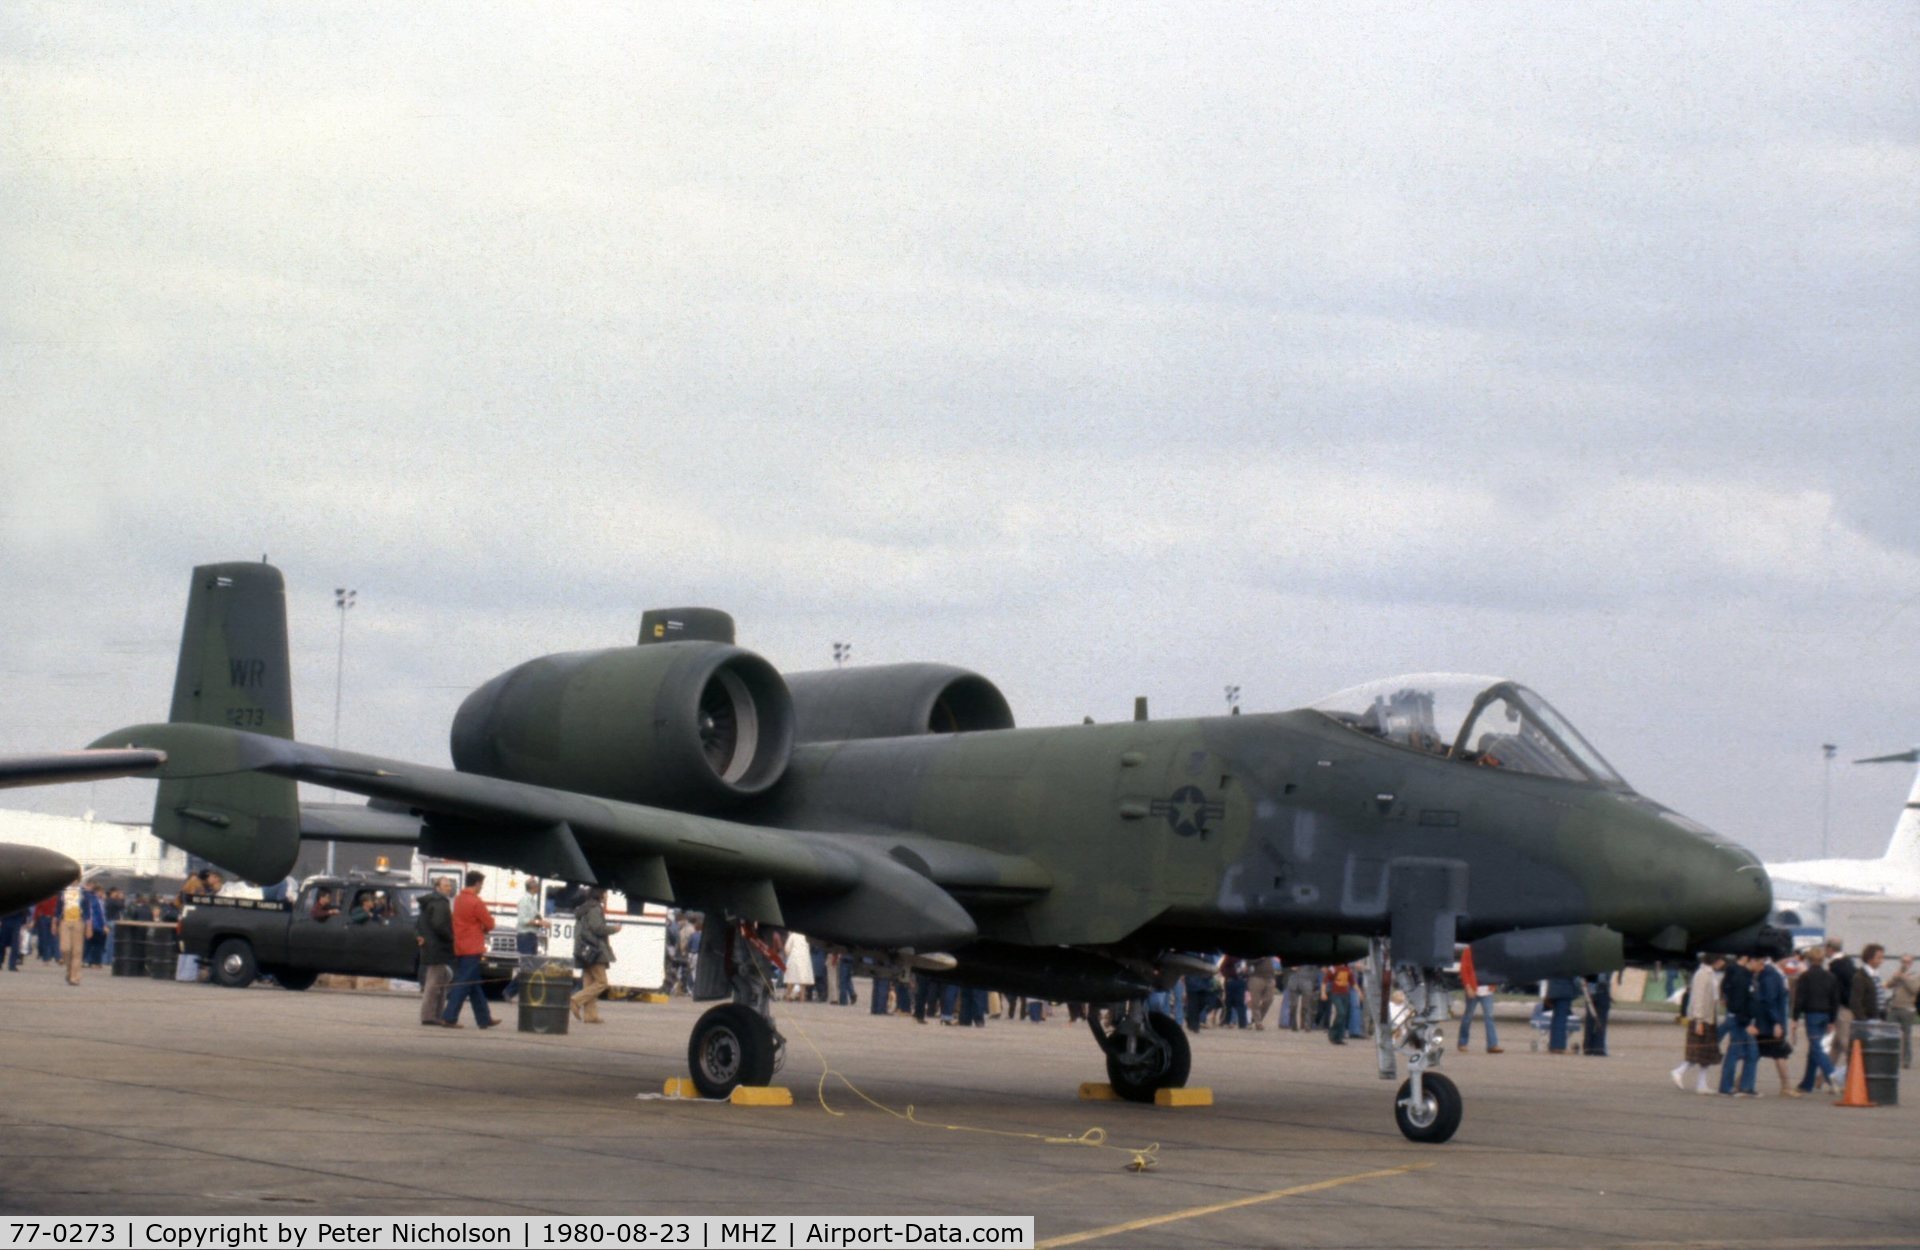 77-0273, 1977 Fairchild Republic A-10A Thunderbolt II C/N A10-0198, A-10A Thunderbolt of 91 Tactical Fighter Squadron/81 Tactical Fighter Wing at the 1980 RAF Mildenhall Air Fete.